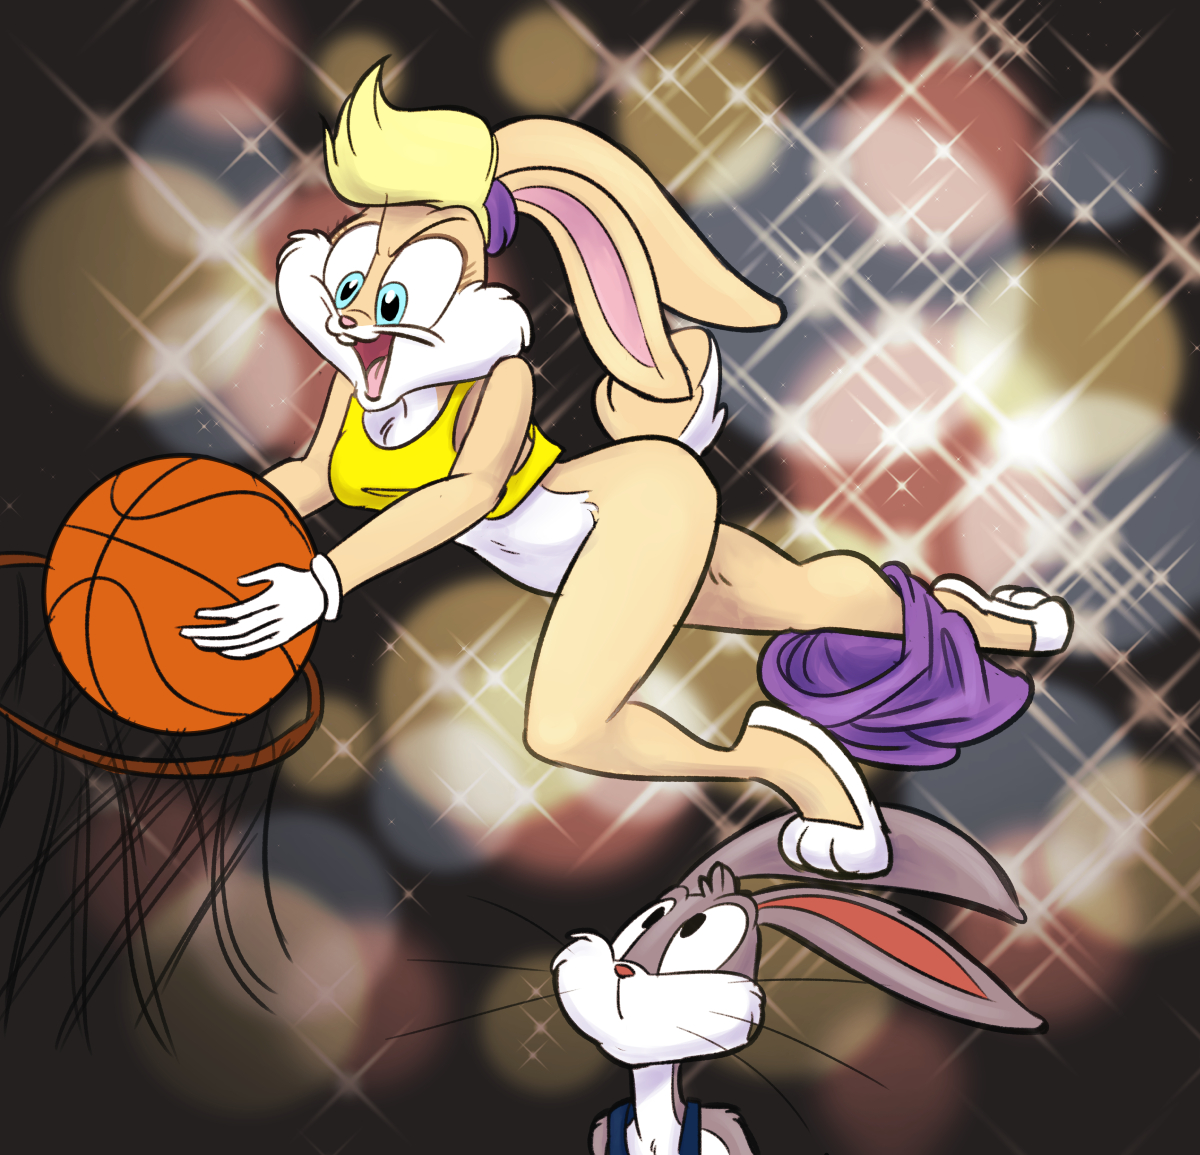 In honor of Space Jam playing on VH1. stokerbramwell. 